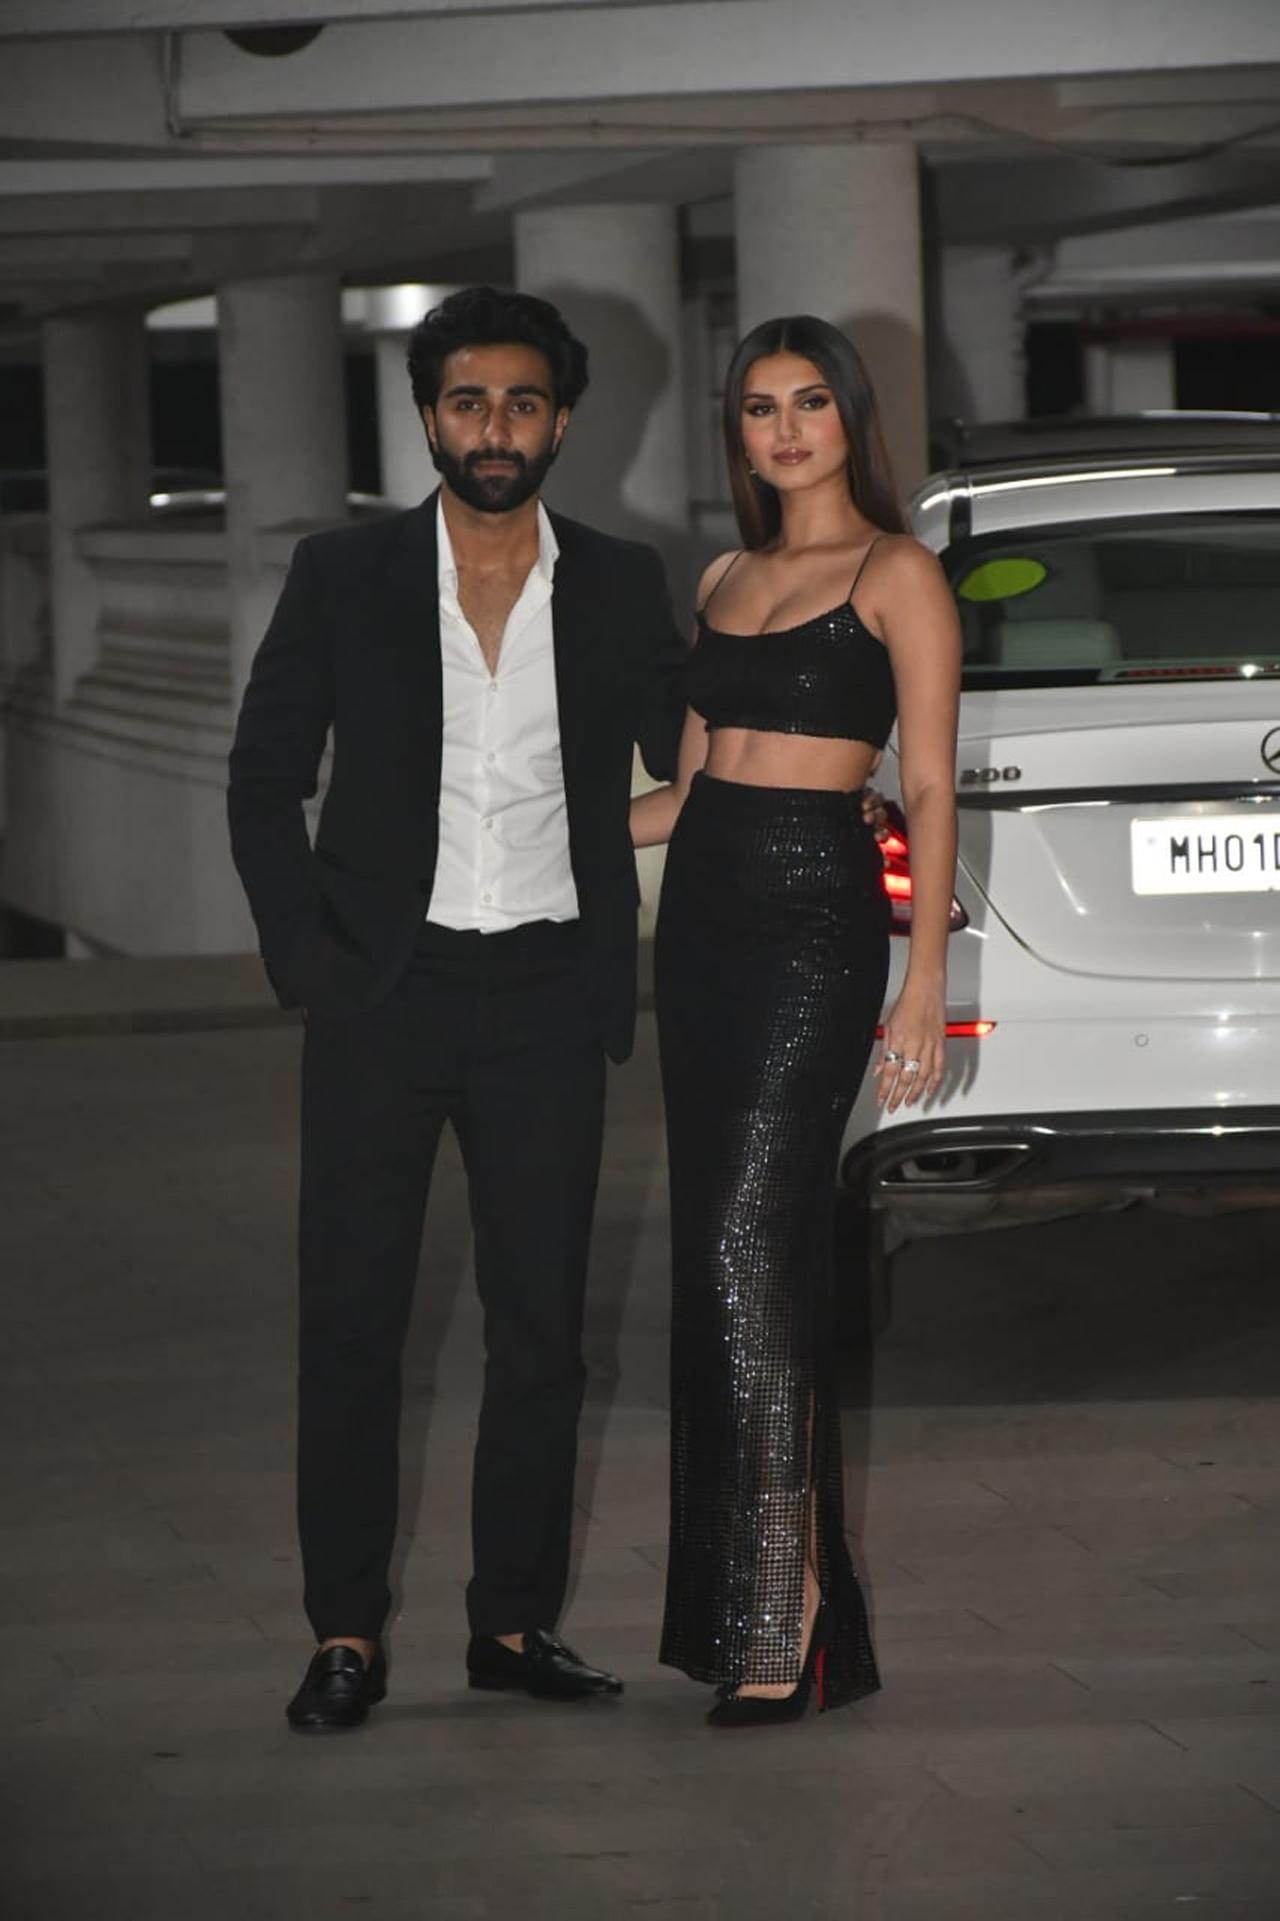 Tara Sutatia showed off her glamourous side in a glittery outfit as she attended the party with her beau Aadar Jain.